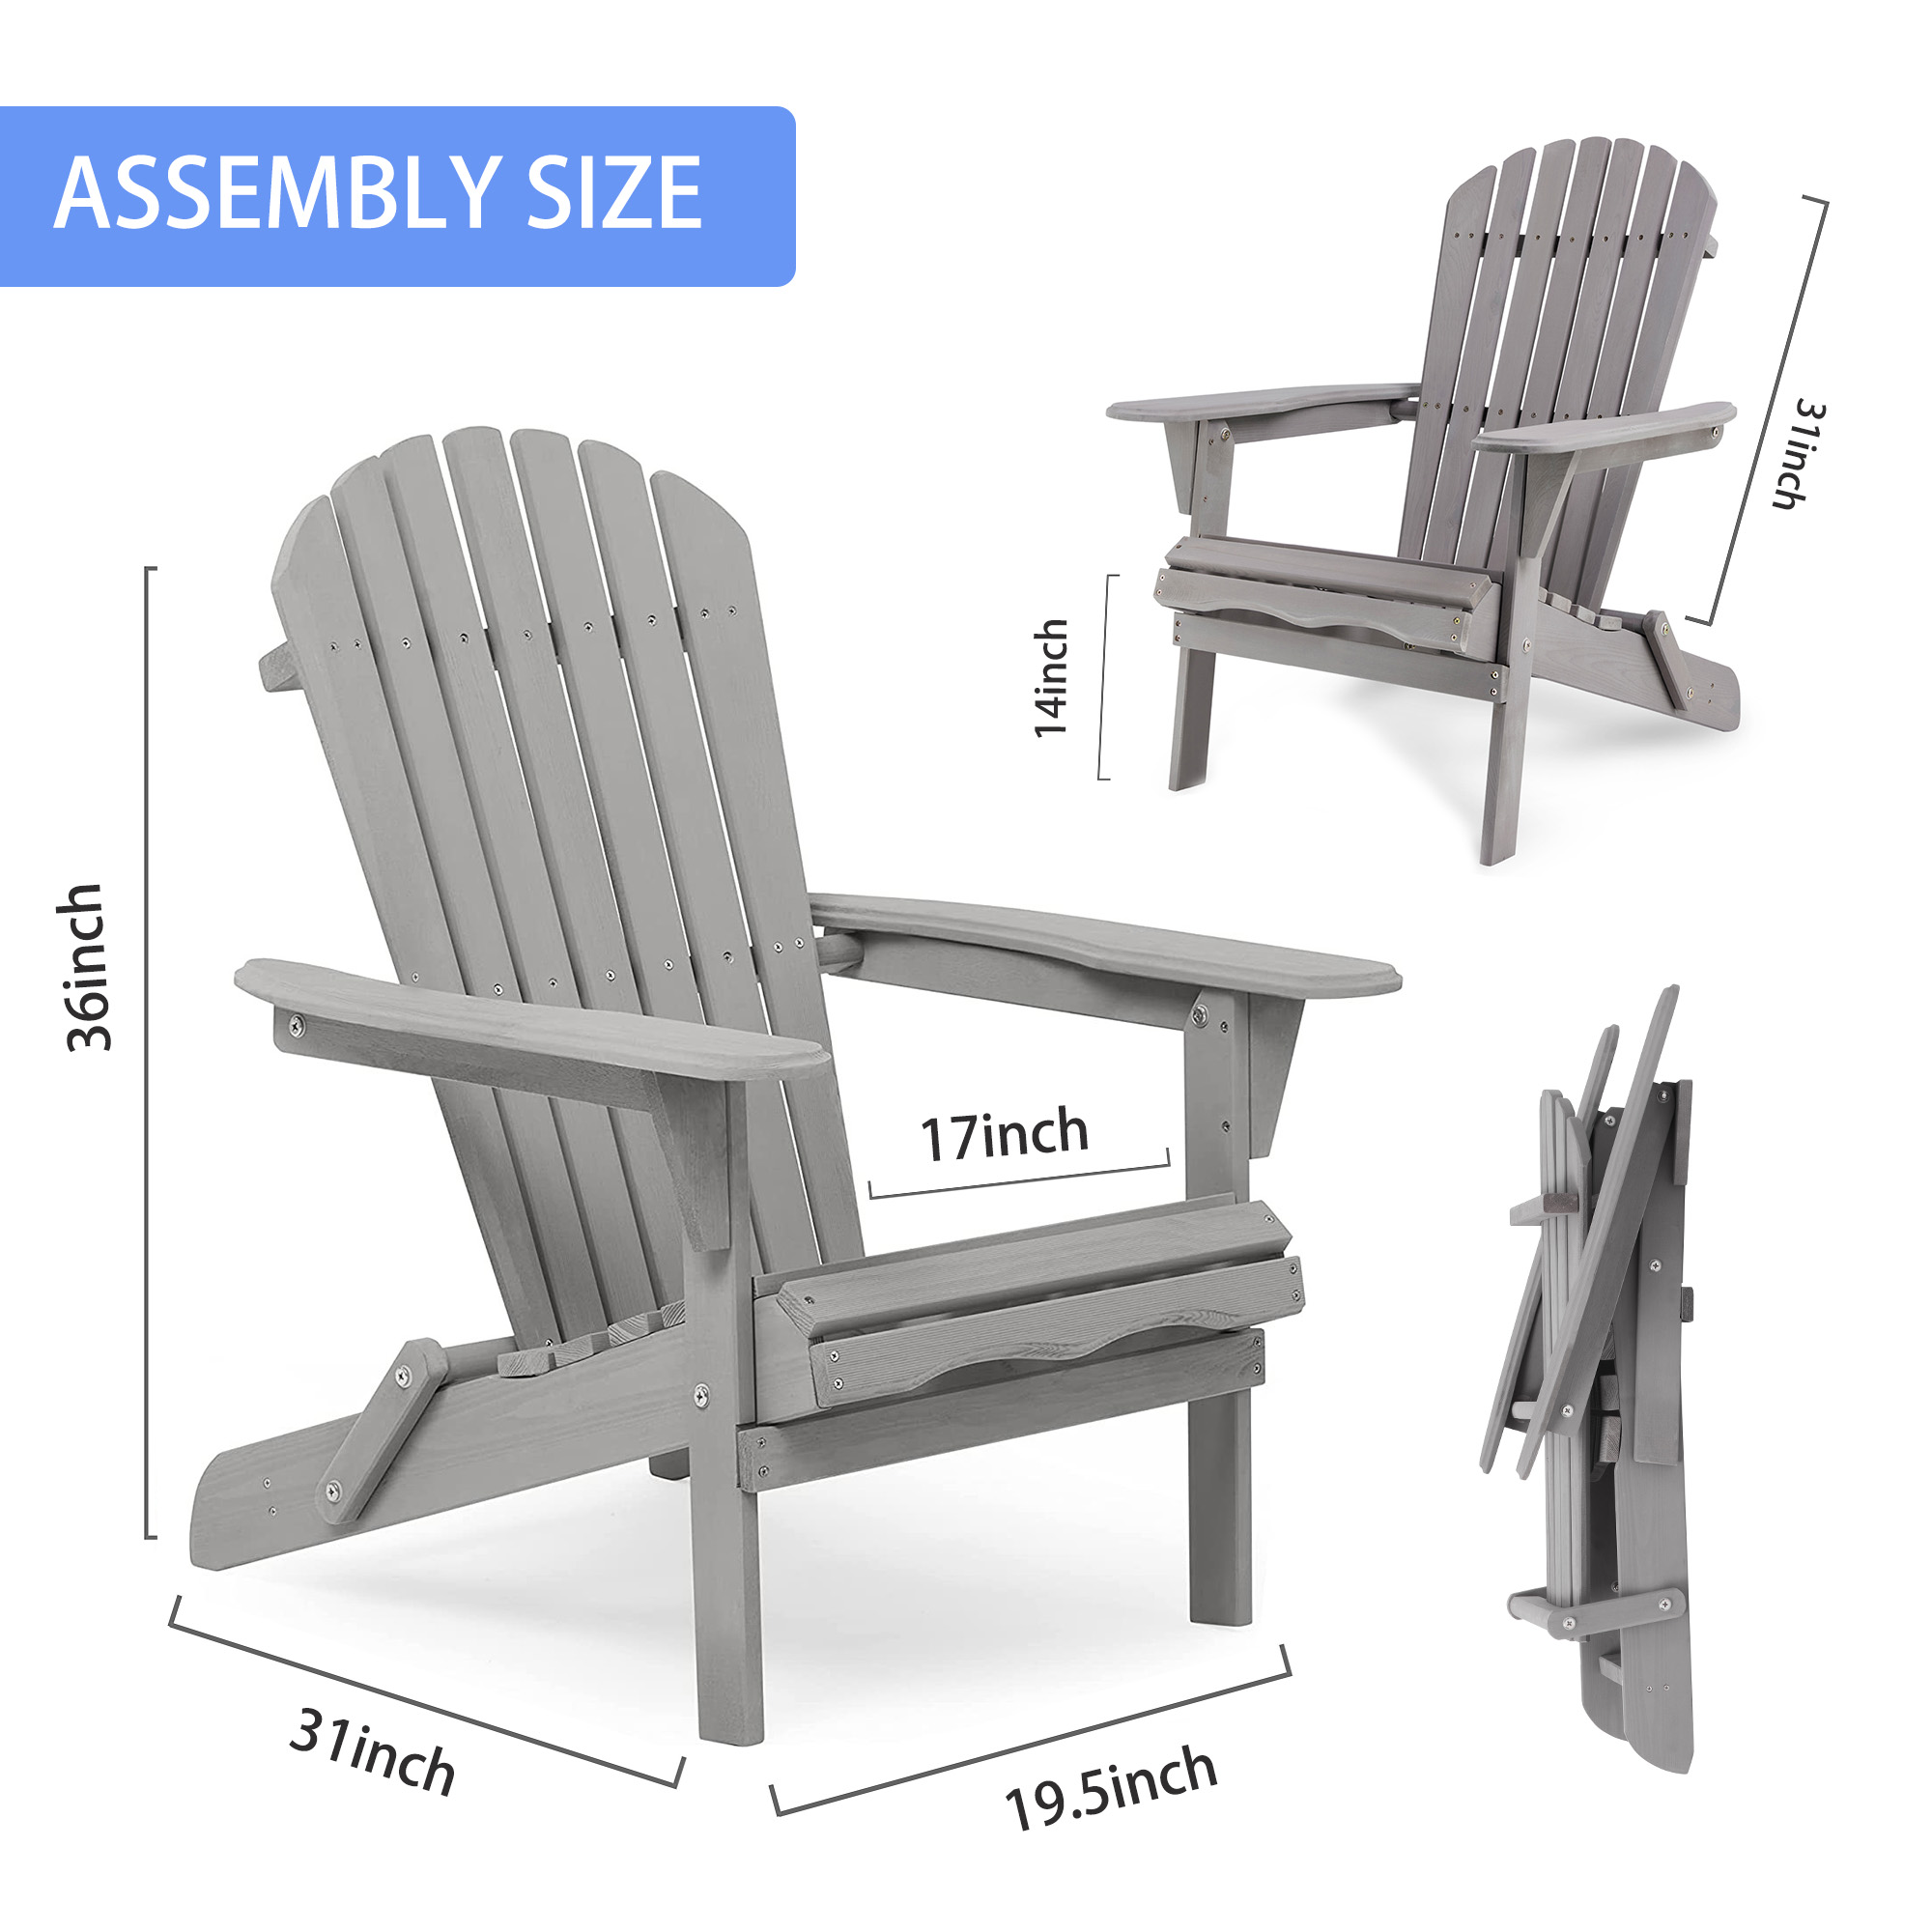 Wood Lounge Patio Chair for Garden Outdoor Wooden Folding Chair Set of 2 Solid Cedar Wood Lounge Patio Chair for Garden, Lawn, Backyard - image 4 of 9